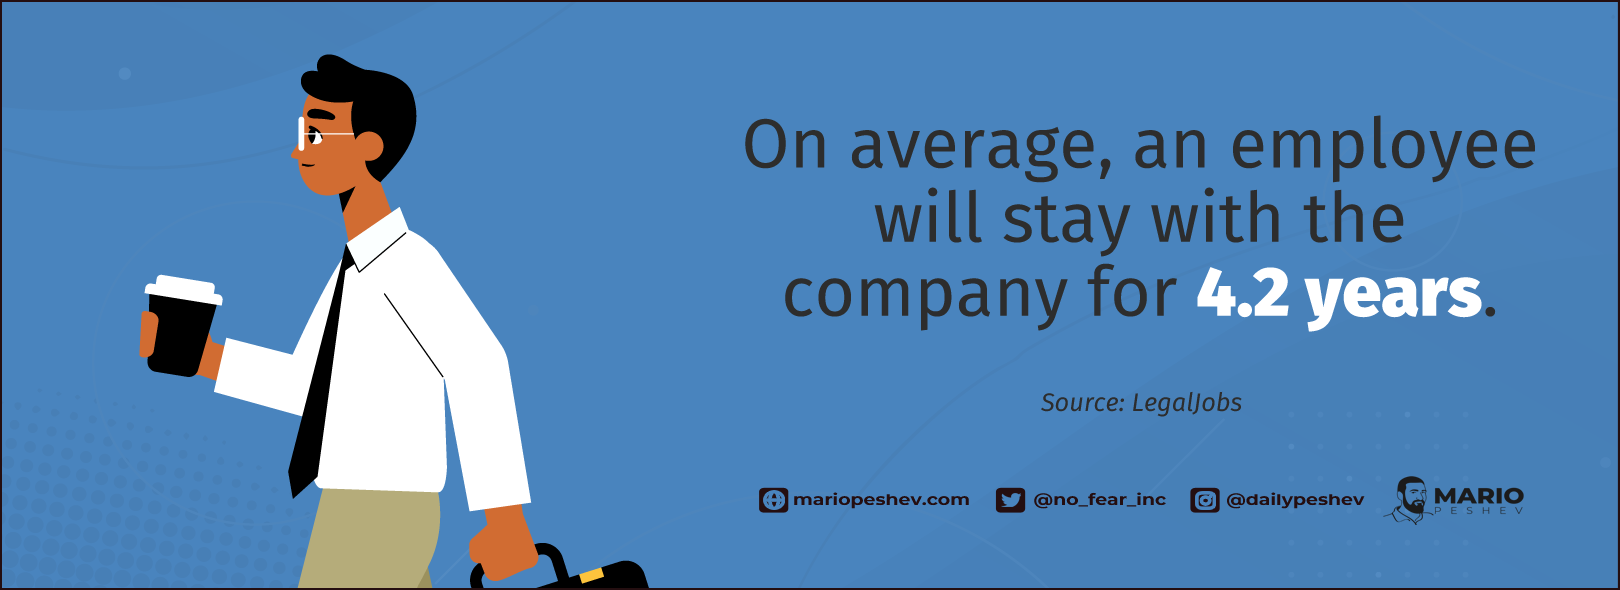 On average, an employee will stay with the company for 4.2 years.